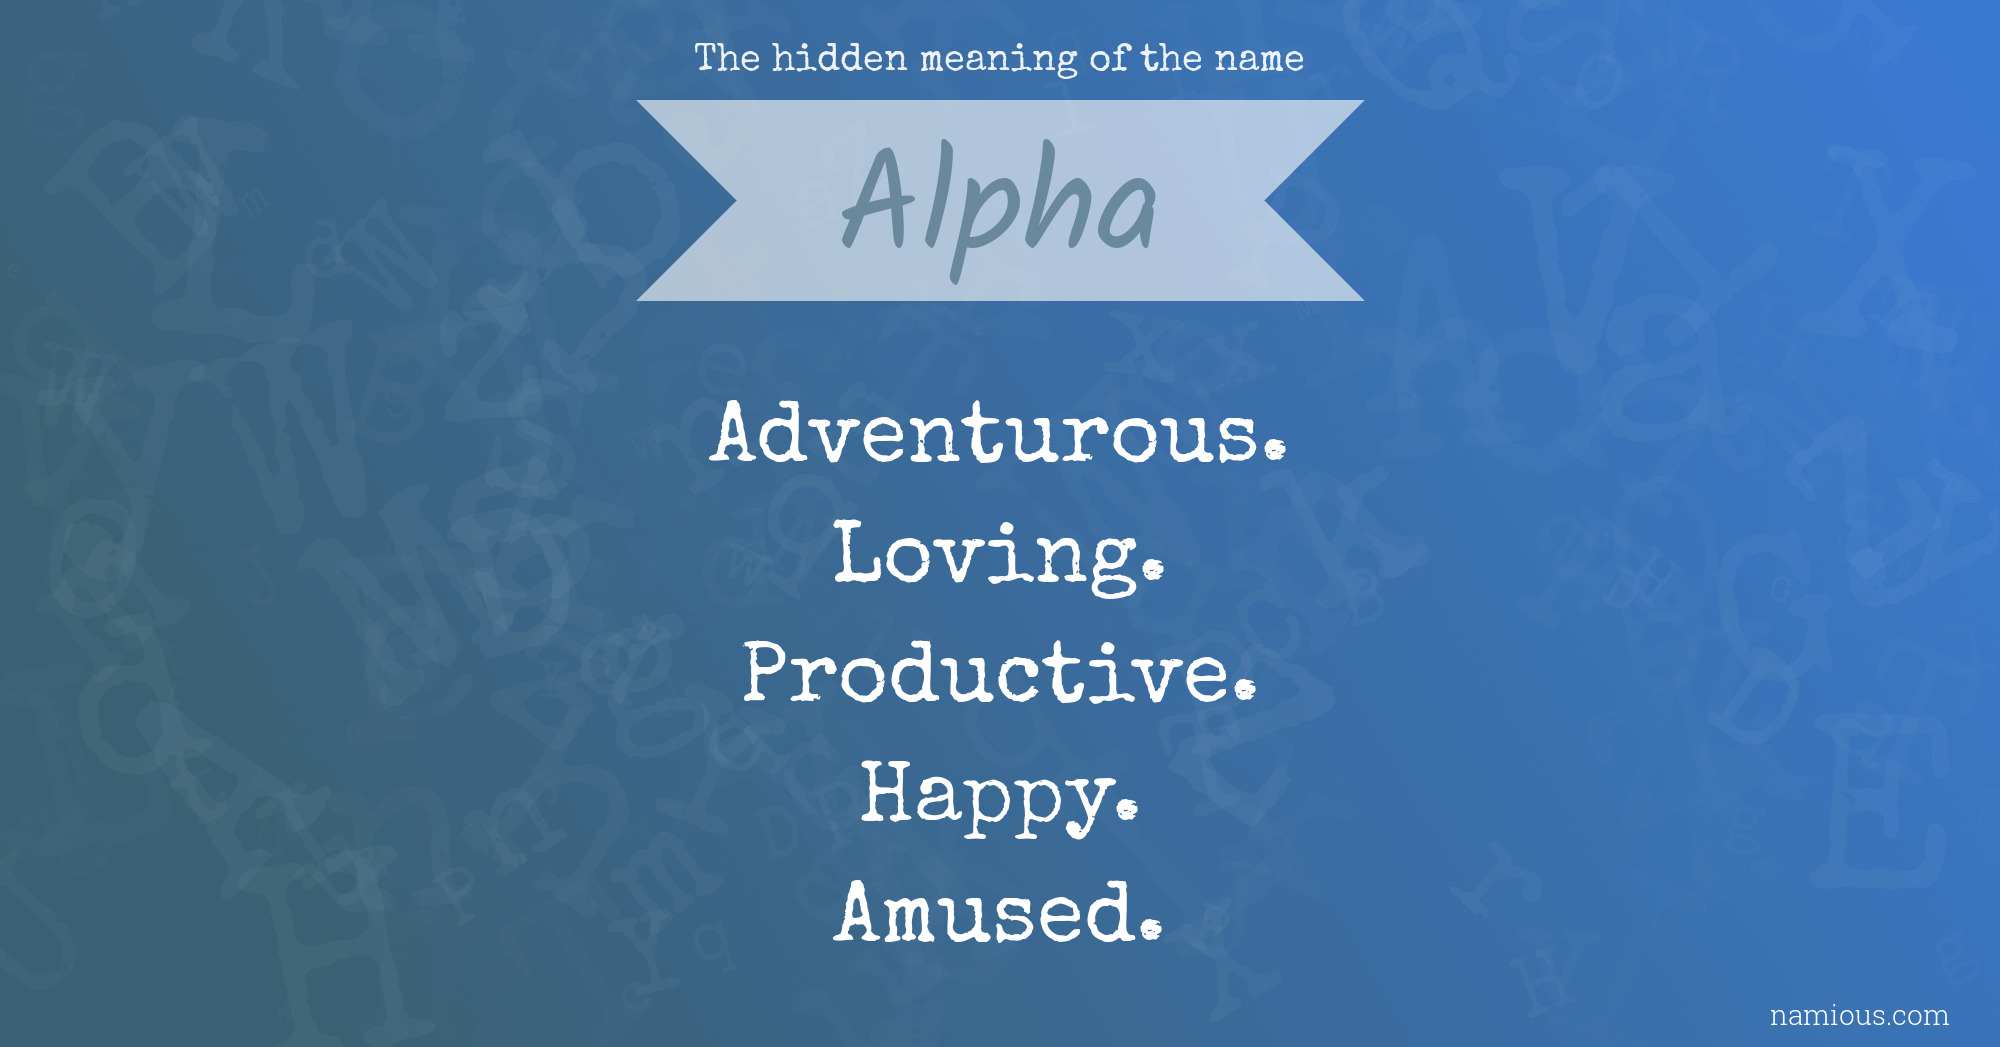 The hidden meaning of the name Alpha